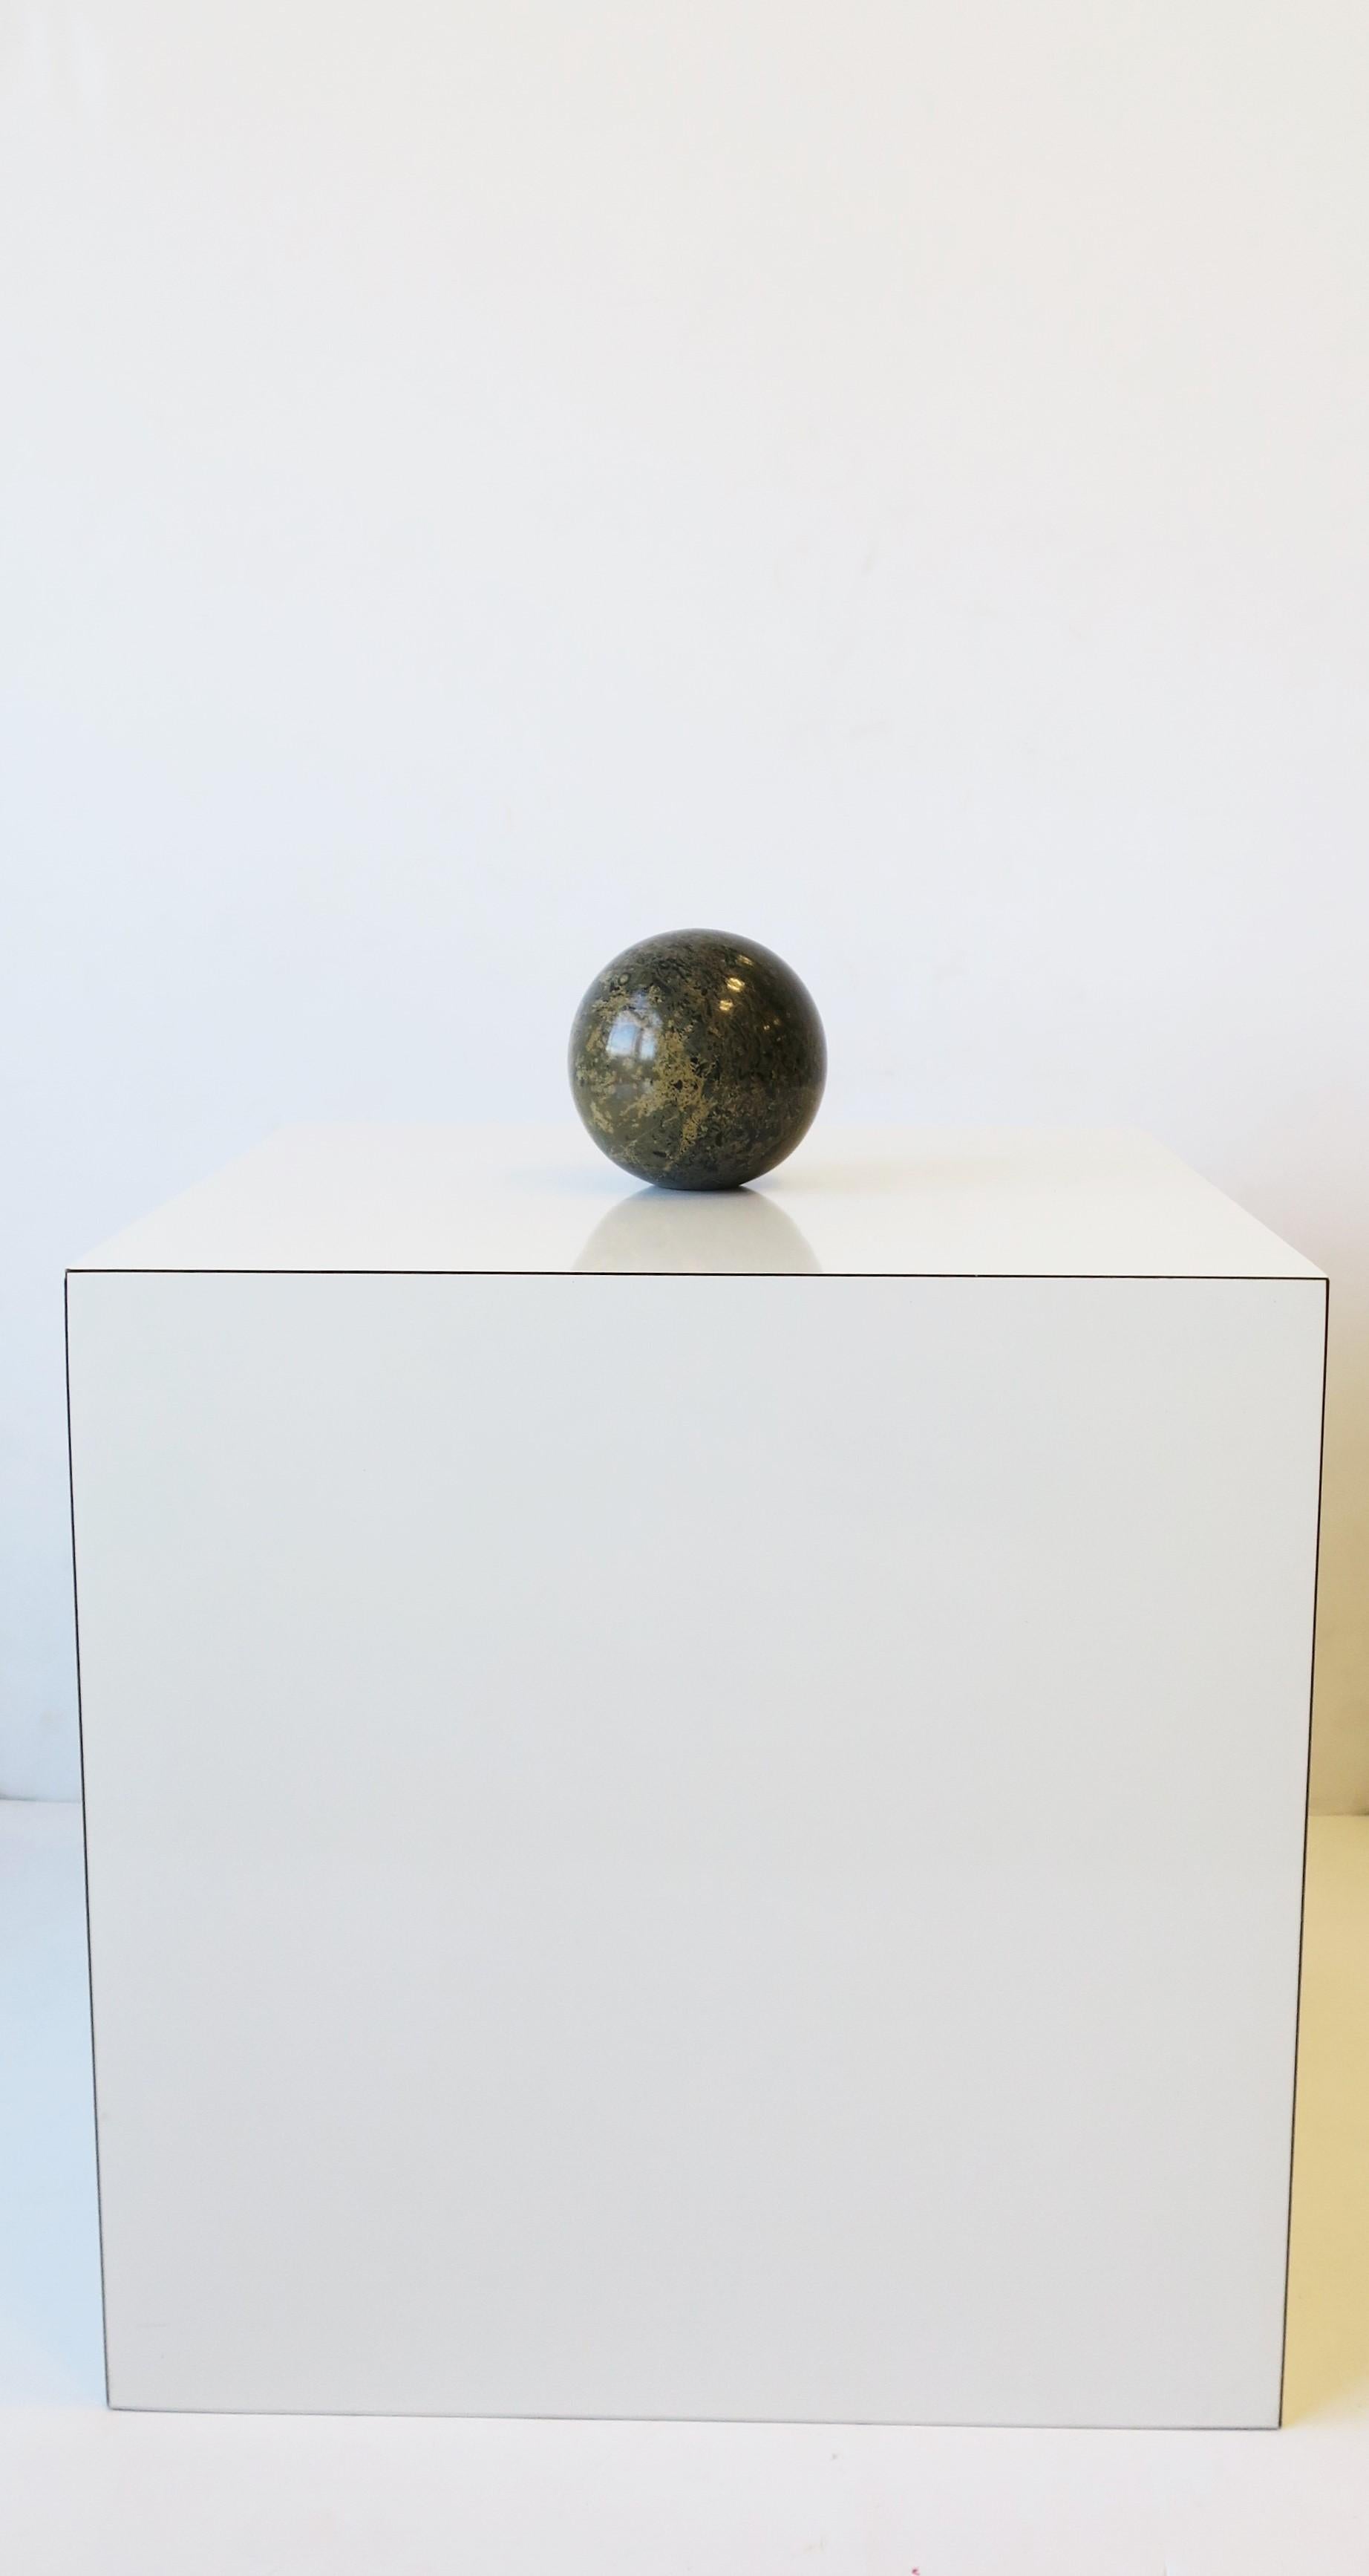 A substantial Art Deco Modern marble round ball sphere in black, dark grey and tan hues, circa late-20th century, 1970s or a little later. A great decorative object as shown in images. Flat bottom for stability. Dimensions: 4